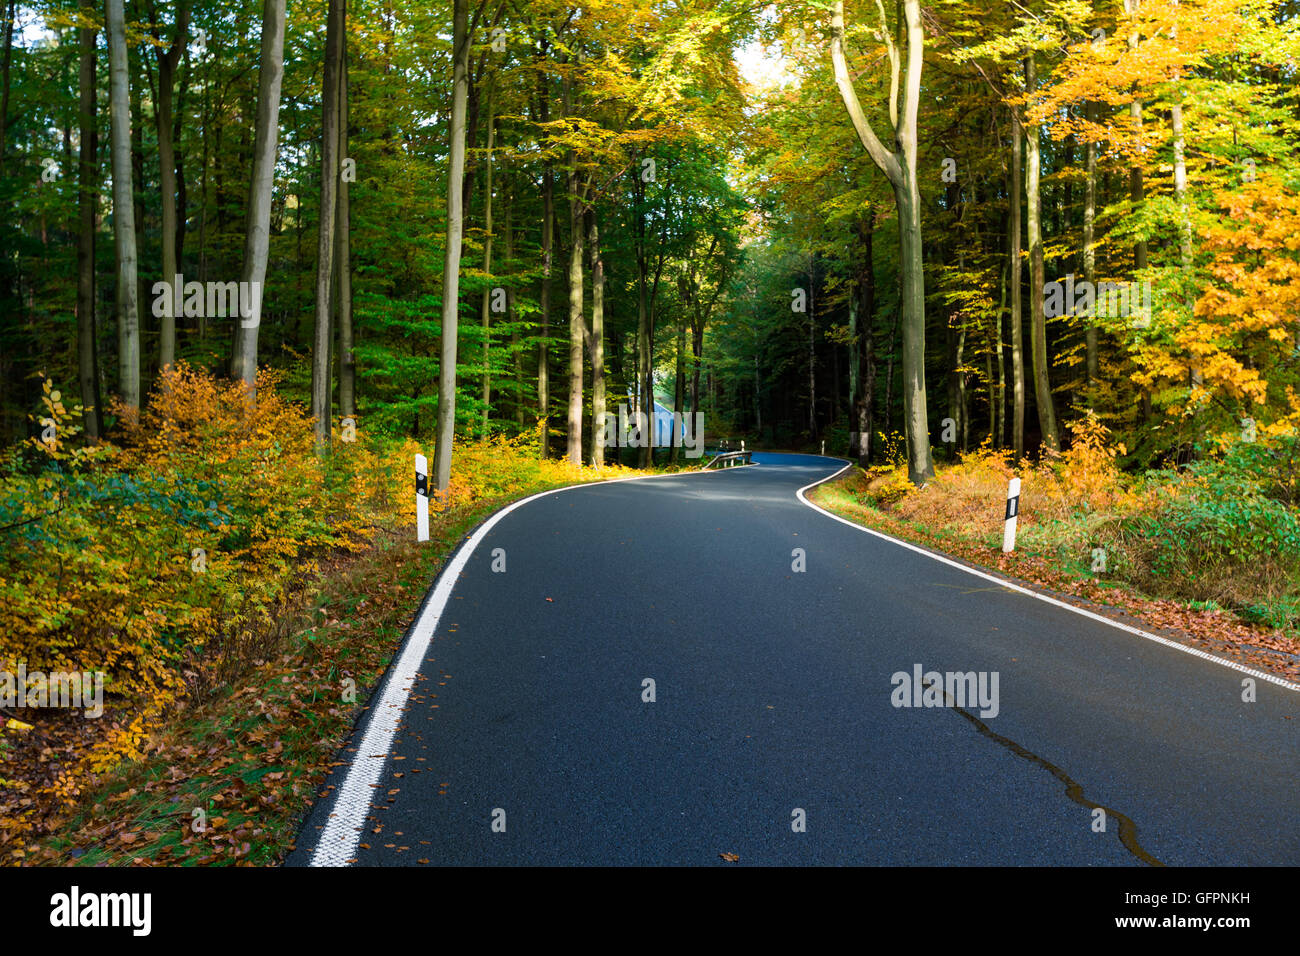 Autumn scene with road in forest, Autumn landscape with road and beautiful colored trees Stock Photo